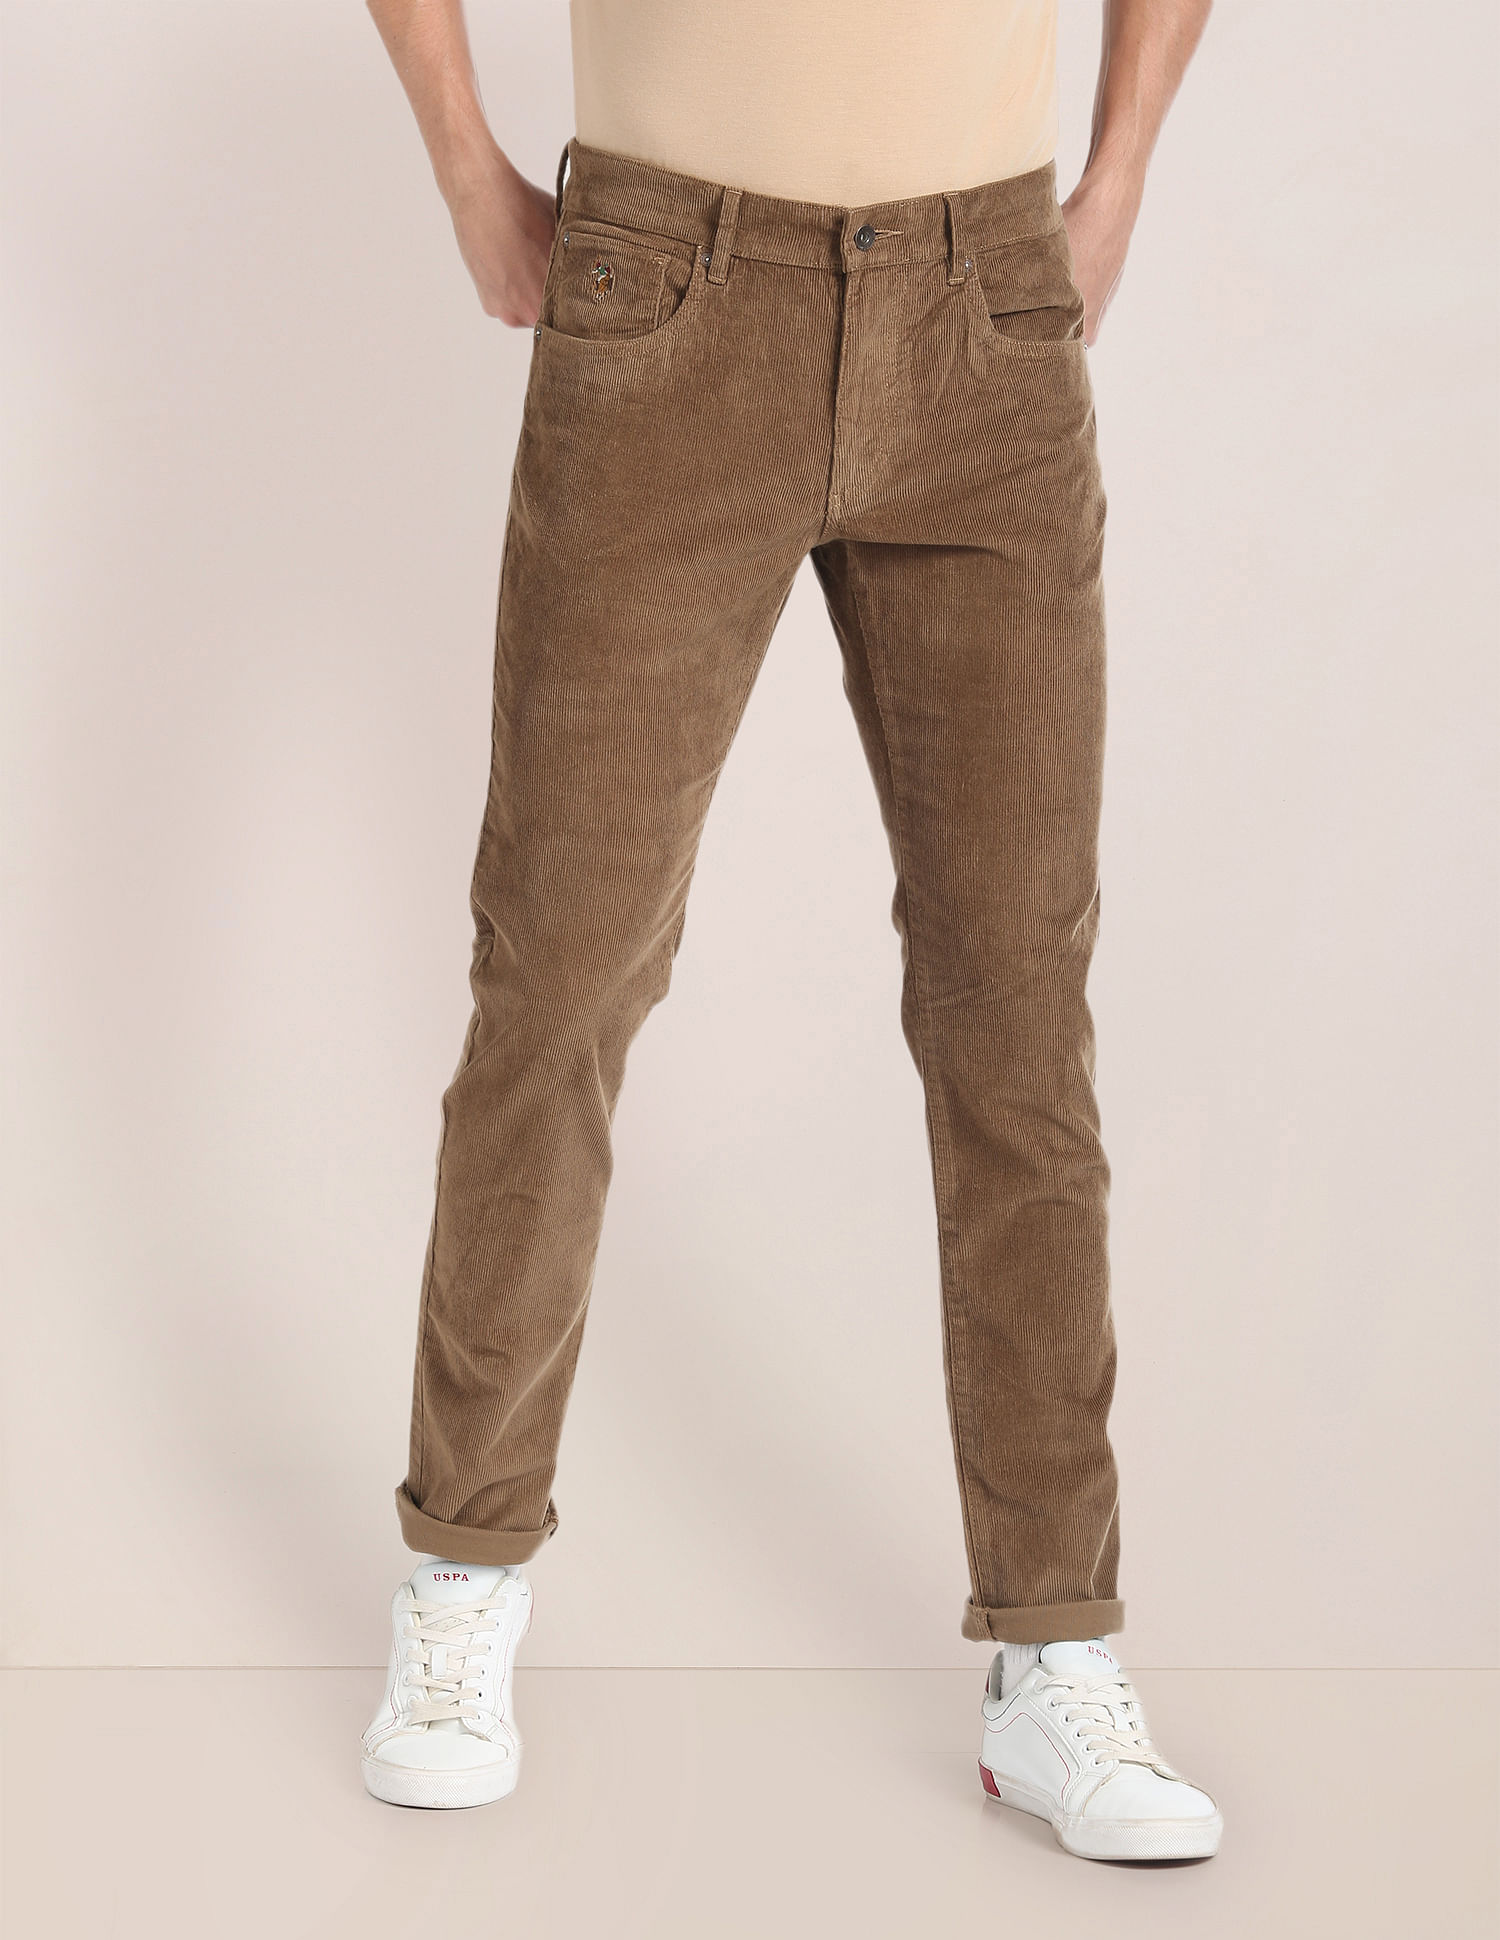 Maroon Corduroy Trousers - Stancliffe Flat-Front in 8-Wale Cotton